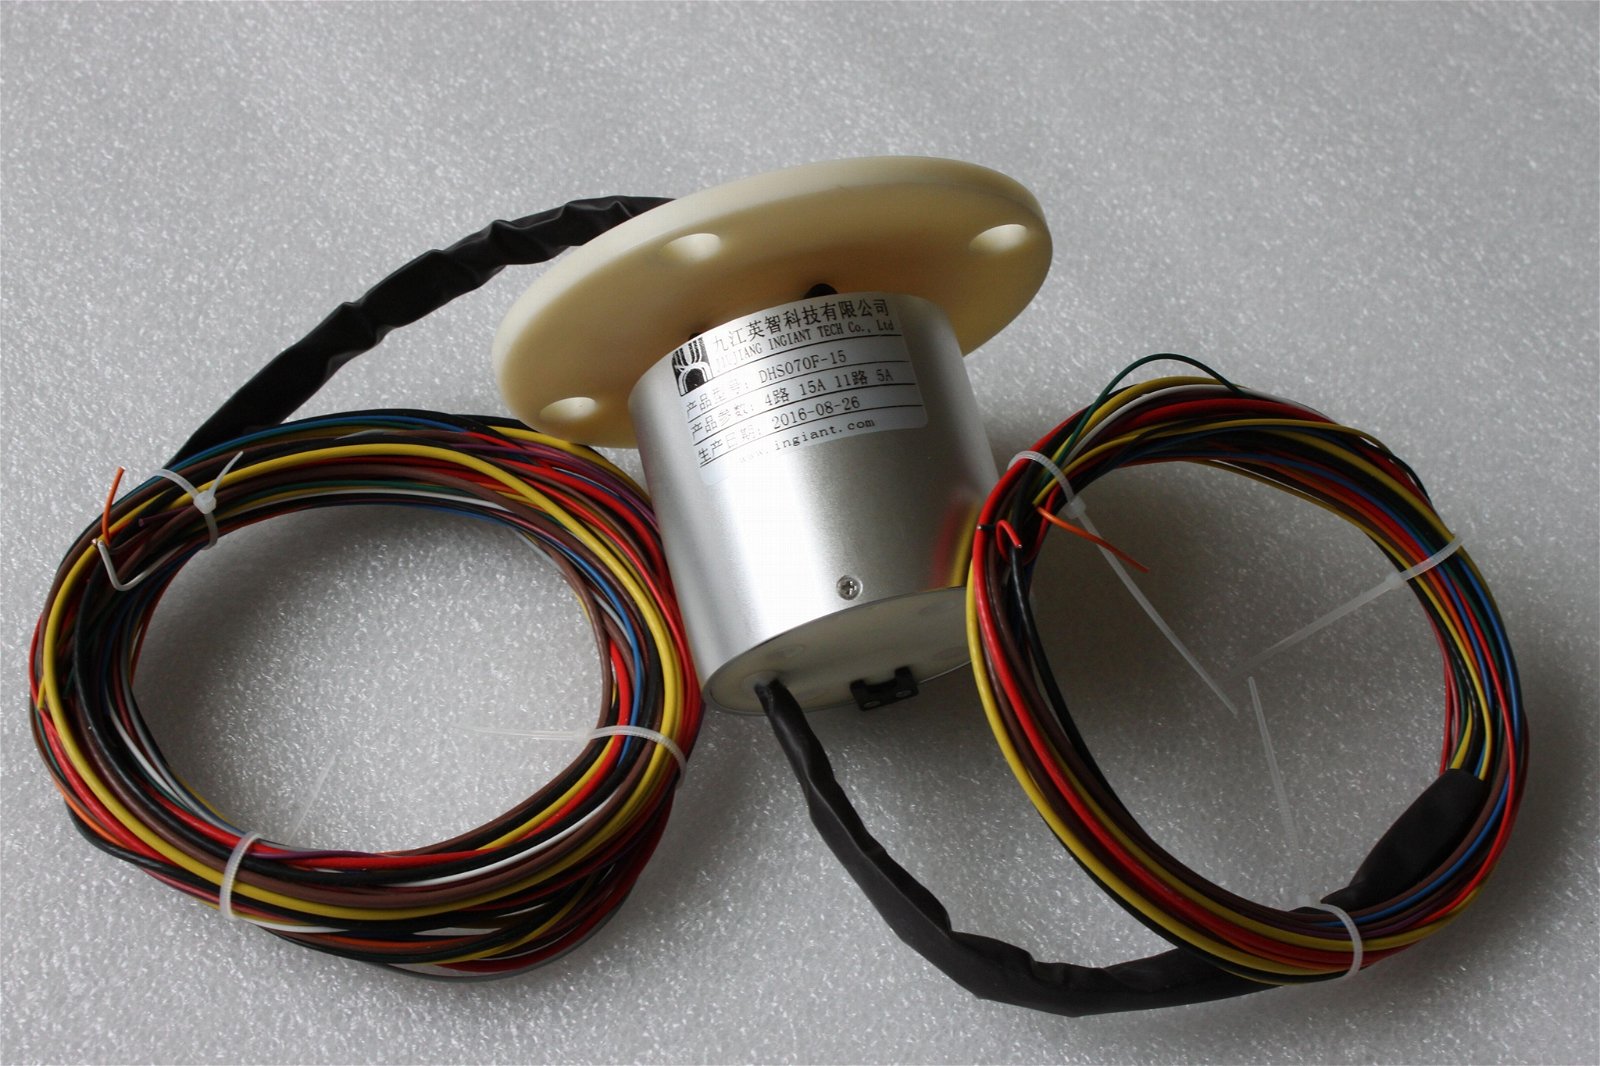 Electric Rotary Connector slipring for robot Revolving door military radar